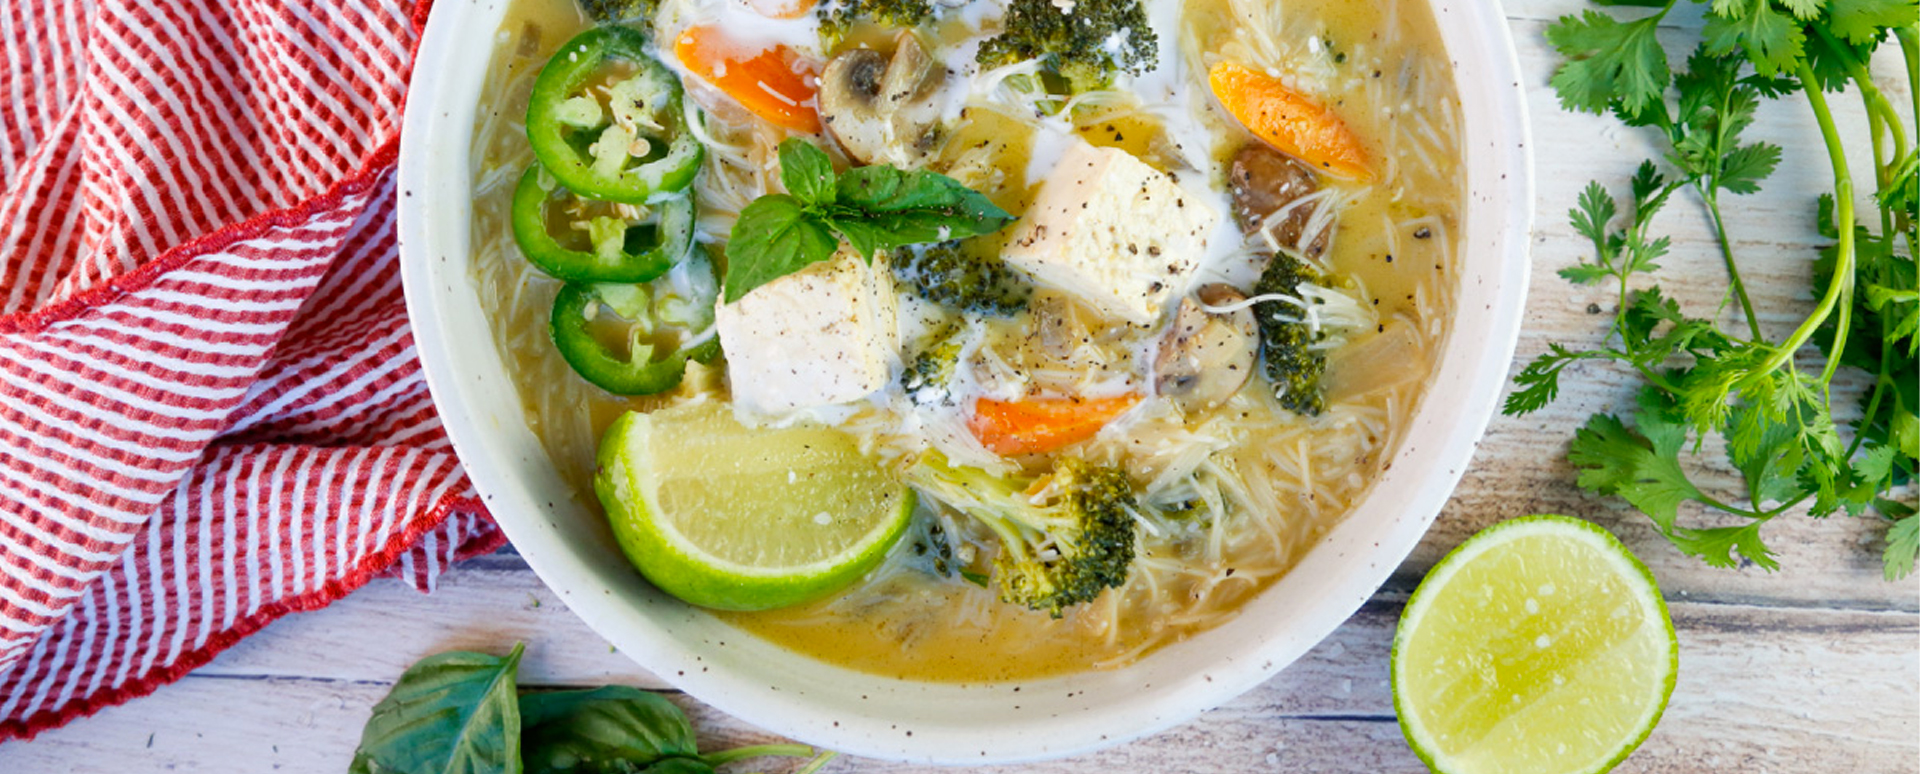 Green Curry Soup with Tofu and Vegetables